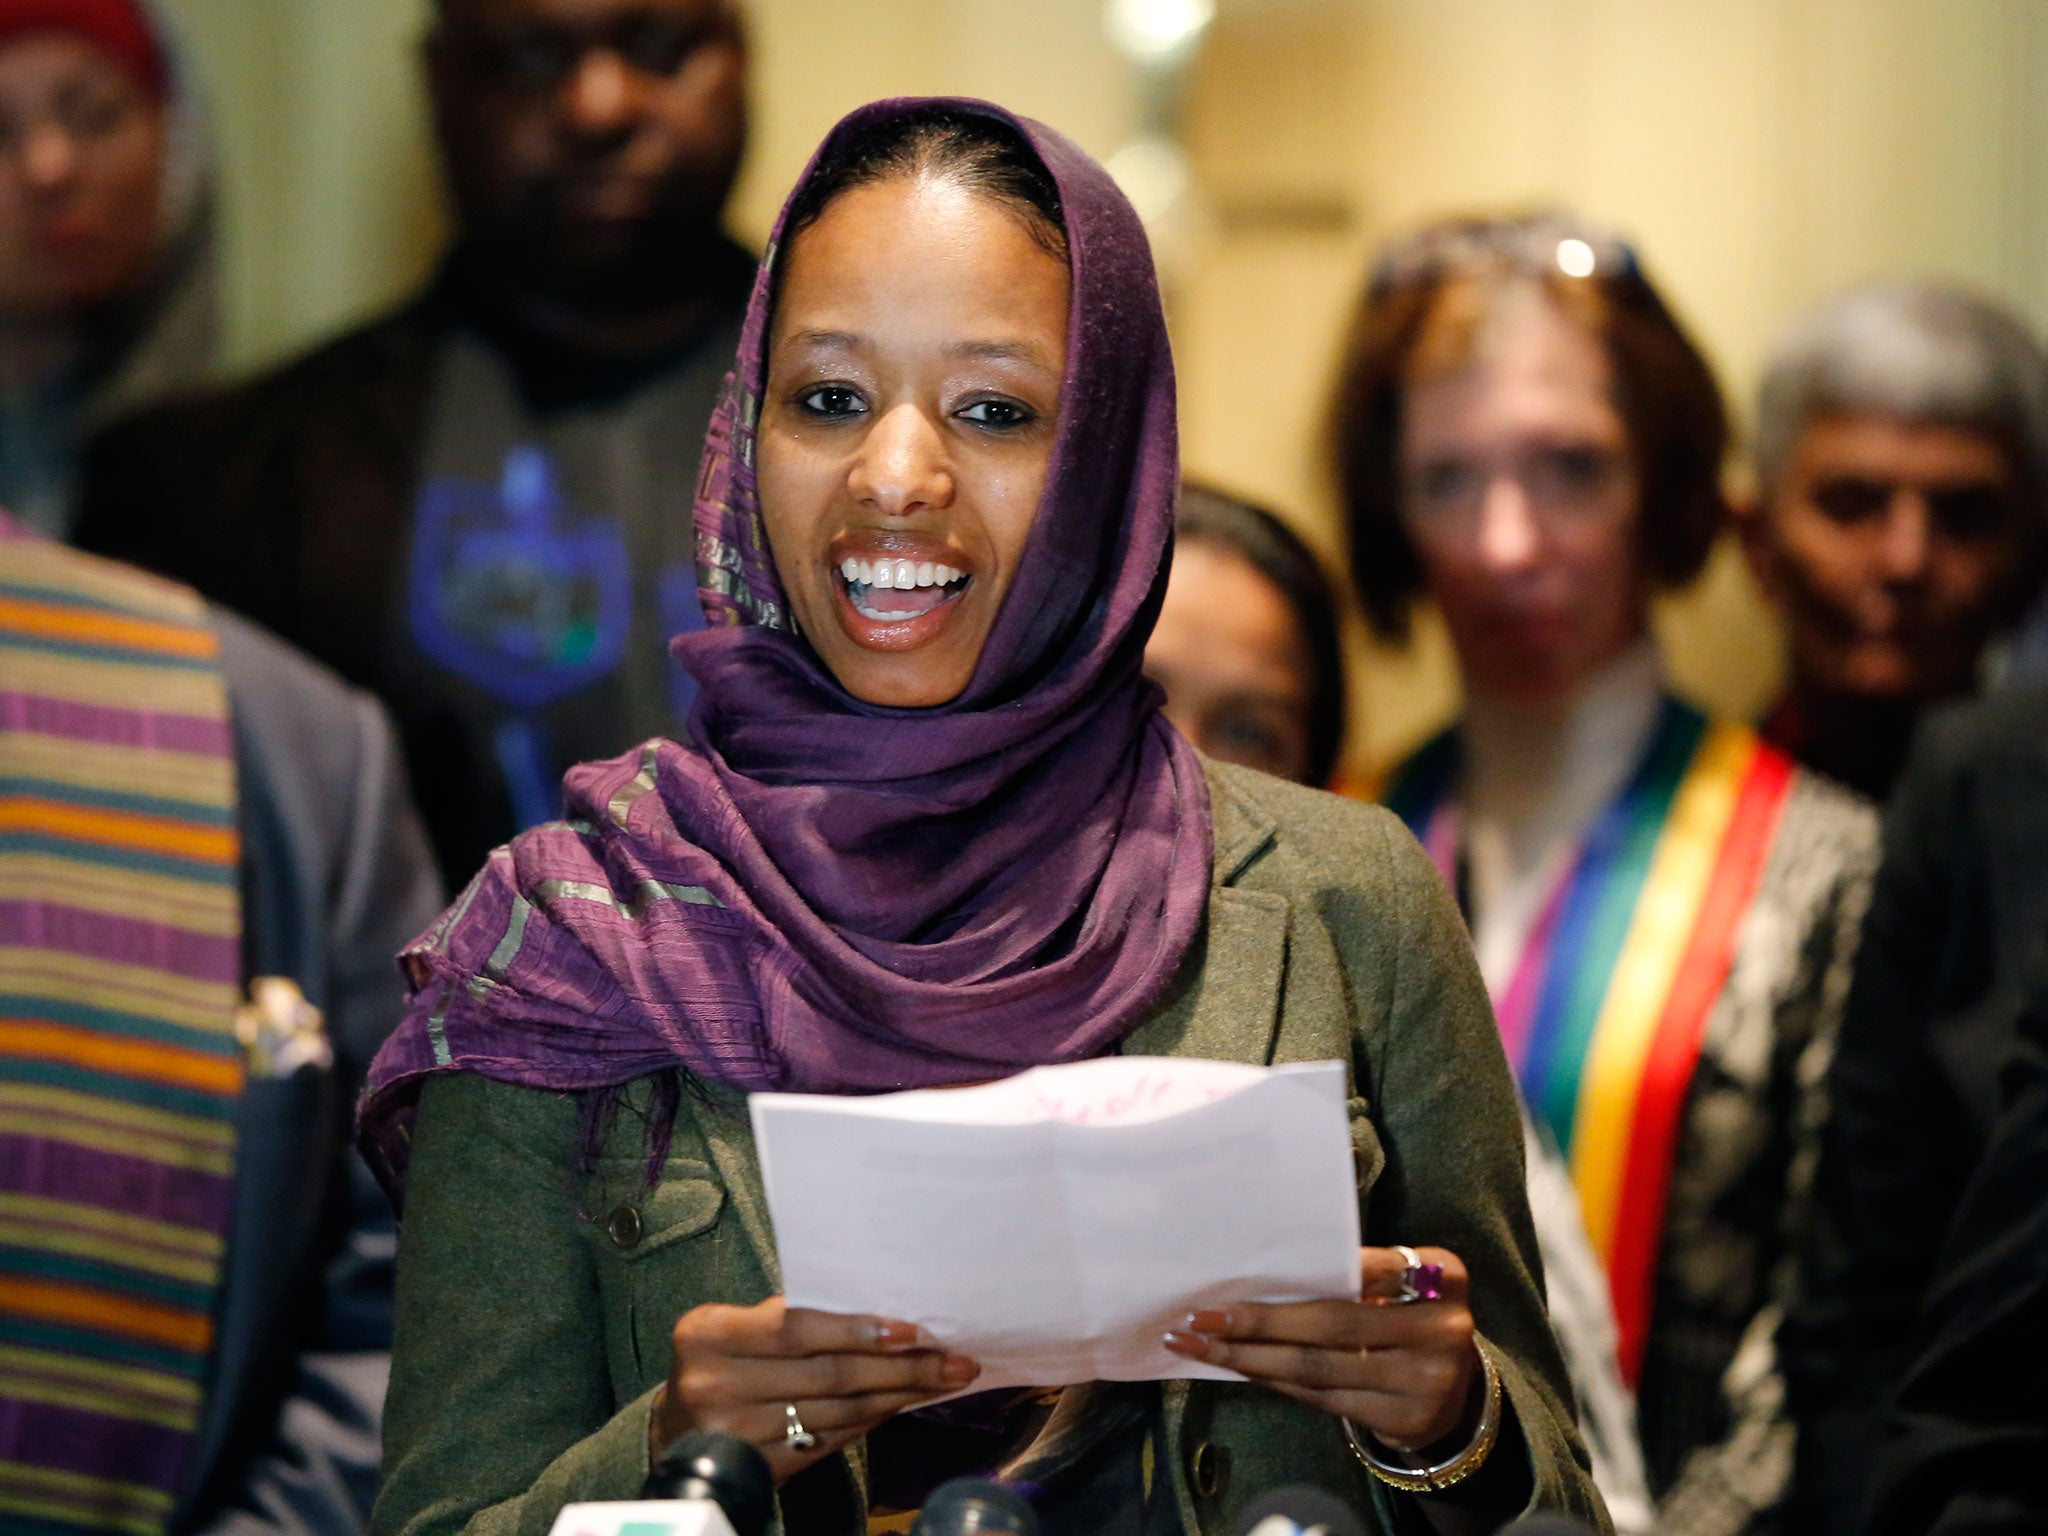 Wheaton College associate professor Dr. Larycia Hawkins has been placed on administrative leave following comments she made on Facebook saying that Muslims and Christians worshipped the same God